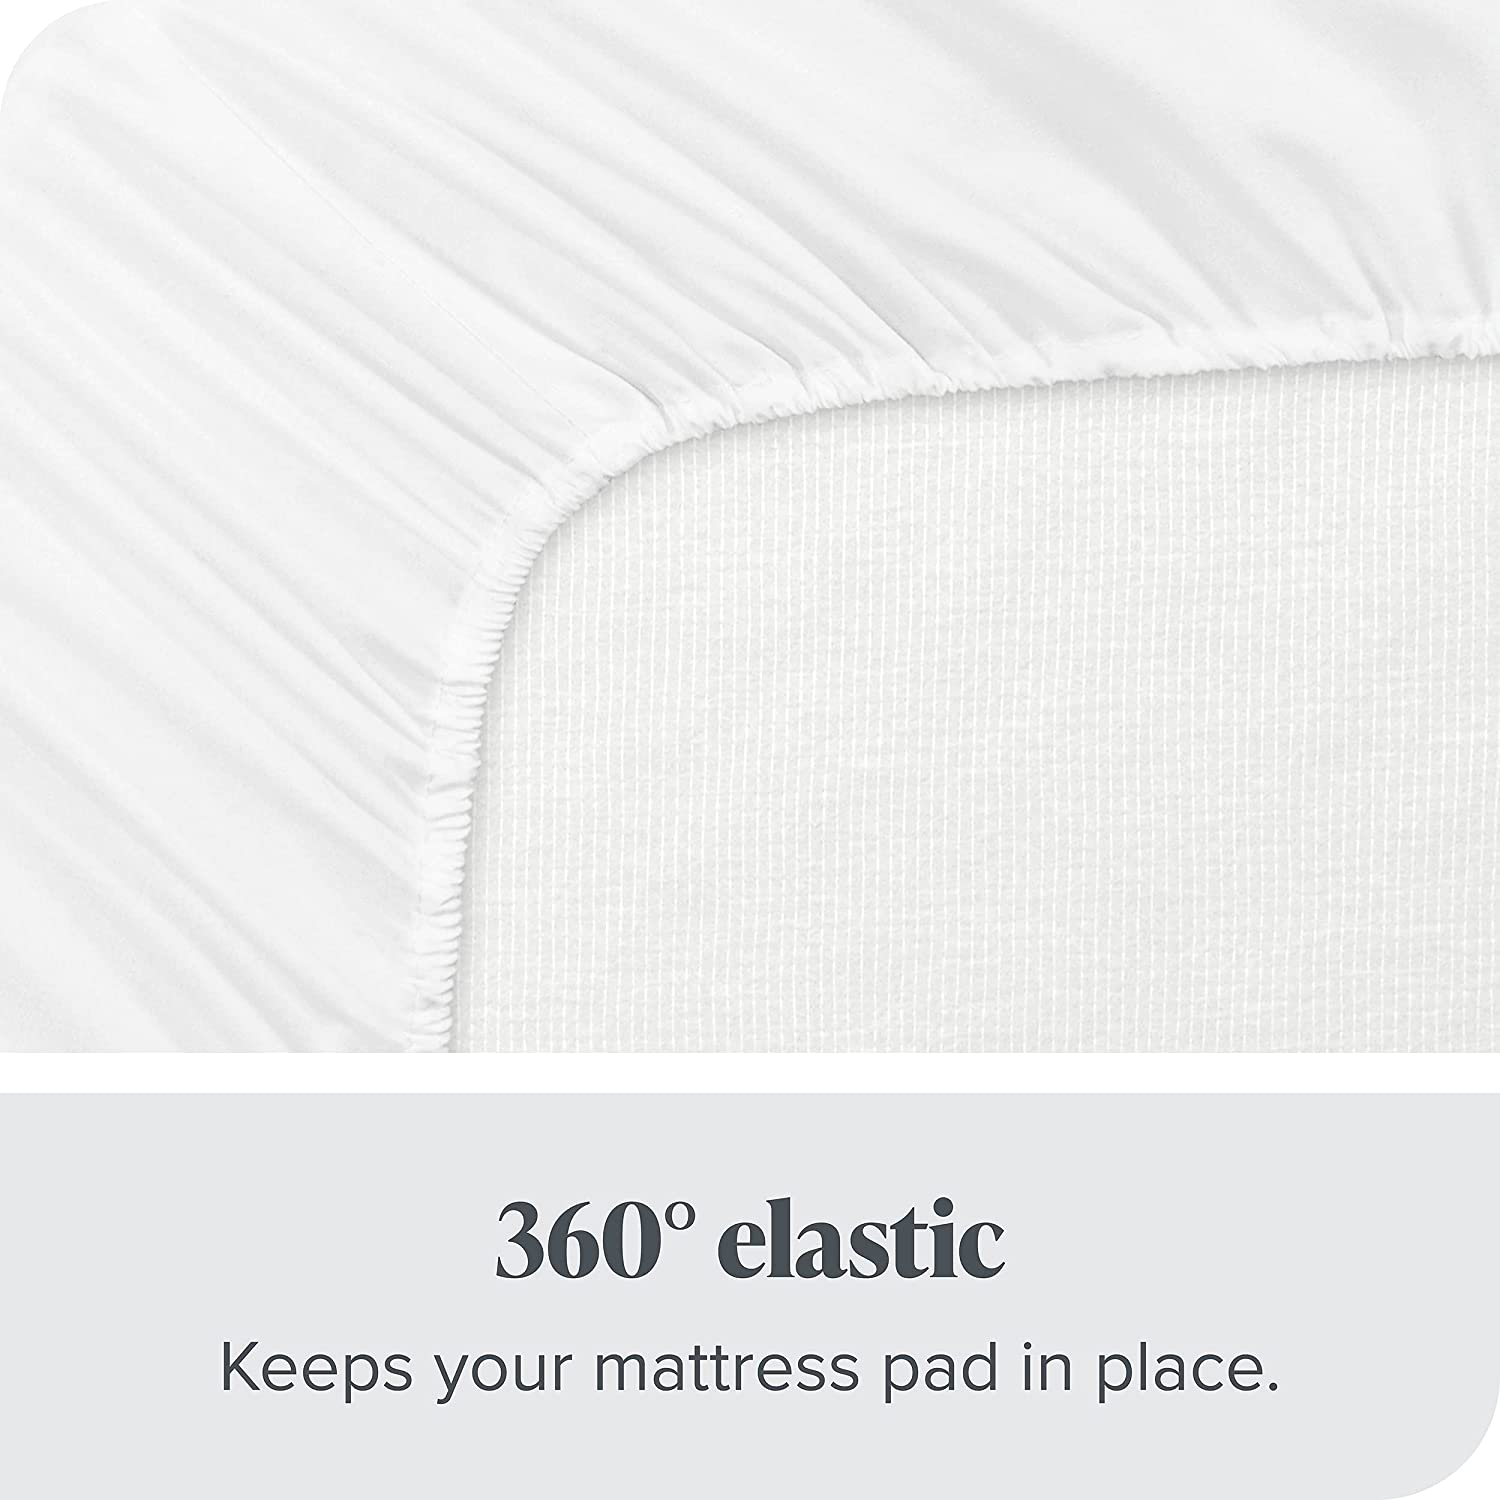 Bare Home Quilted Fitted Mattress Pad (Full) - Cooling Mattress Topper - Easily Washable - Elastic Fitted Mattress Cover - Stretch-to-Fit up to 15 Inches Deep (Full)